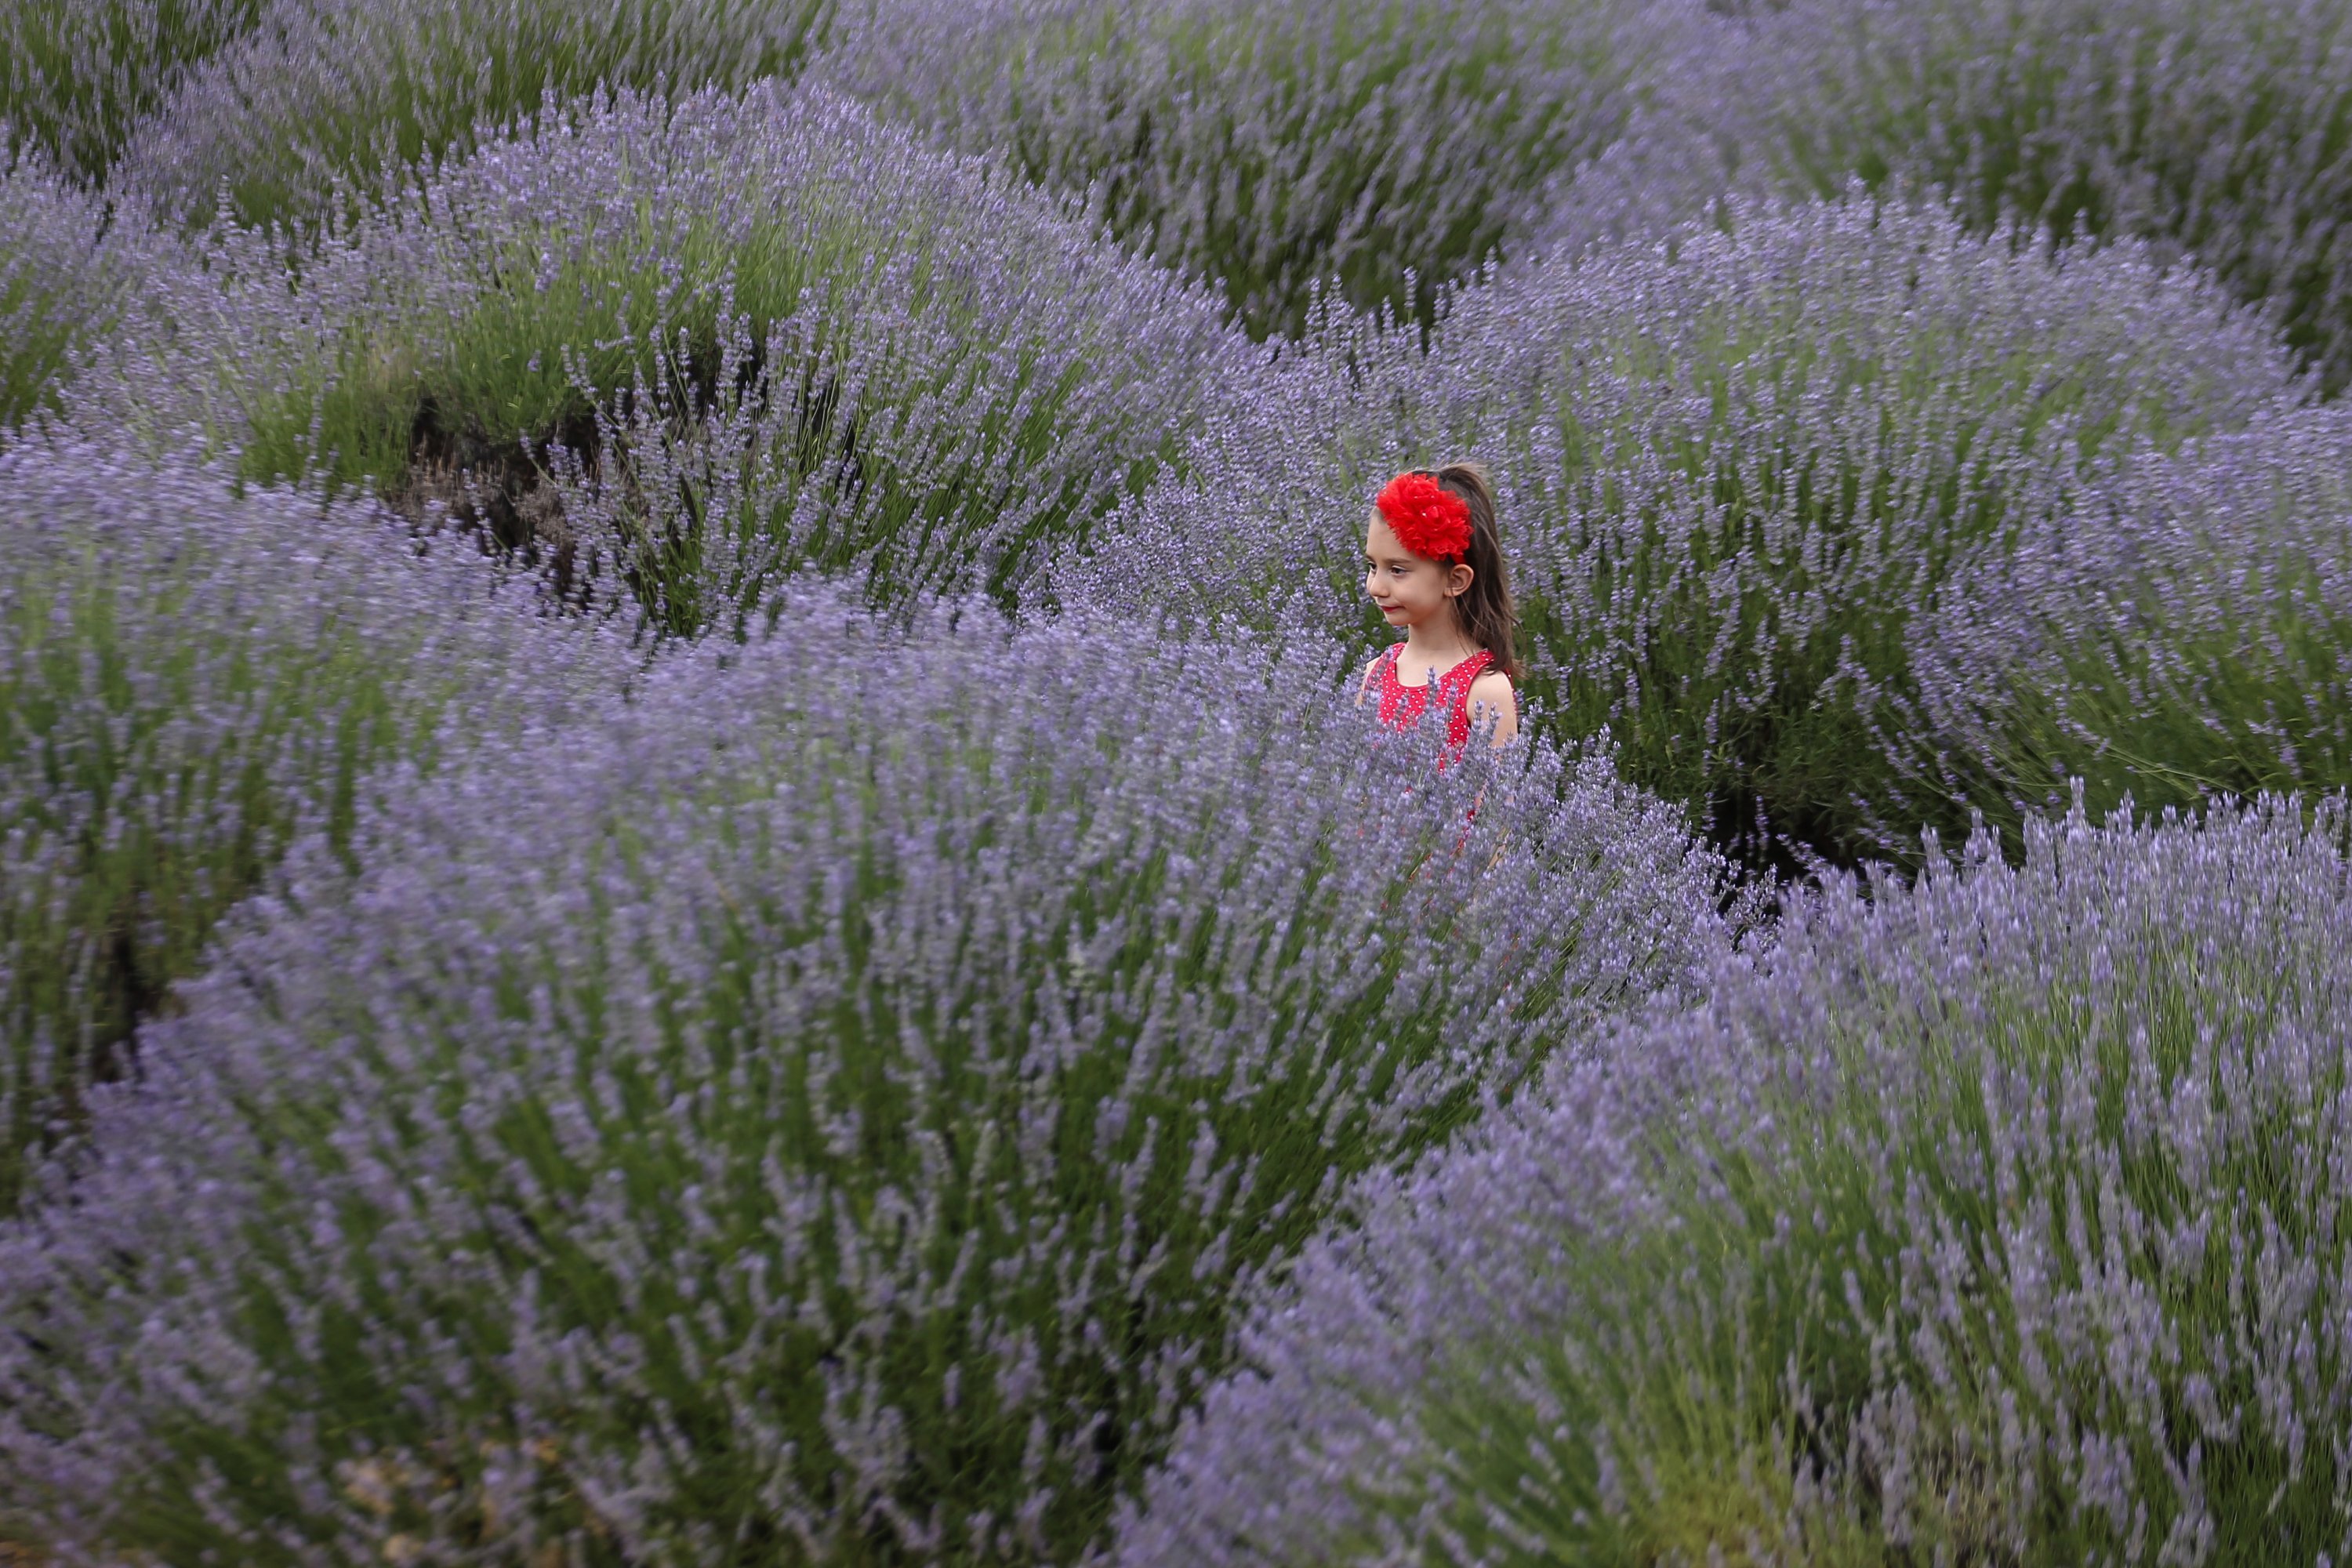 The best-known village for lavender production in Turkey is Isparta